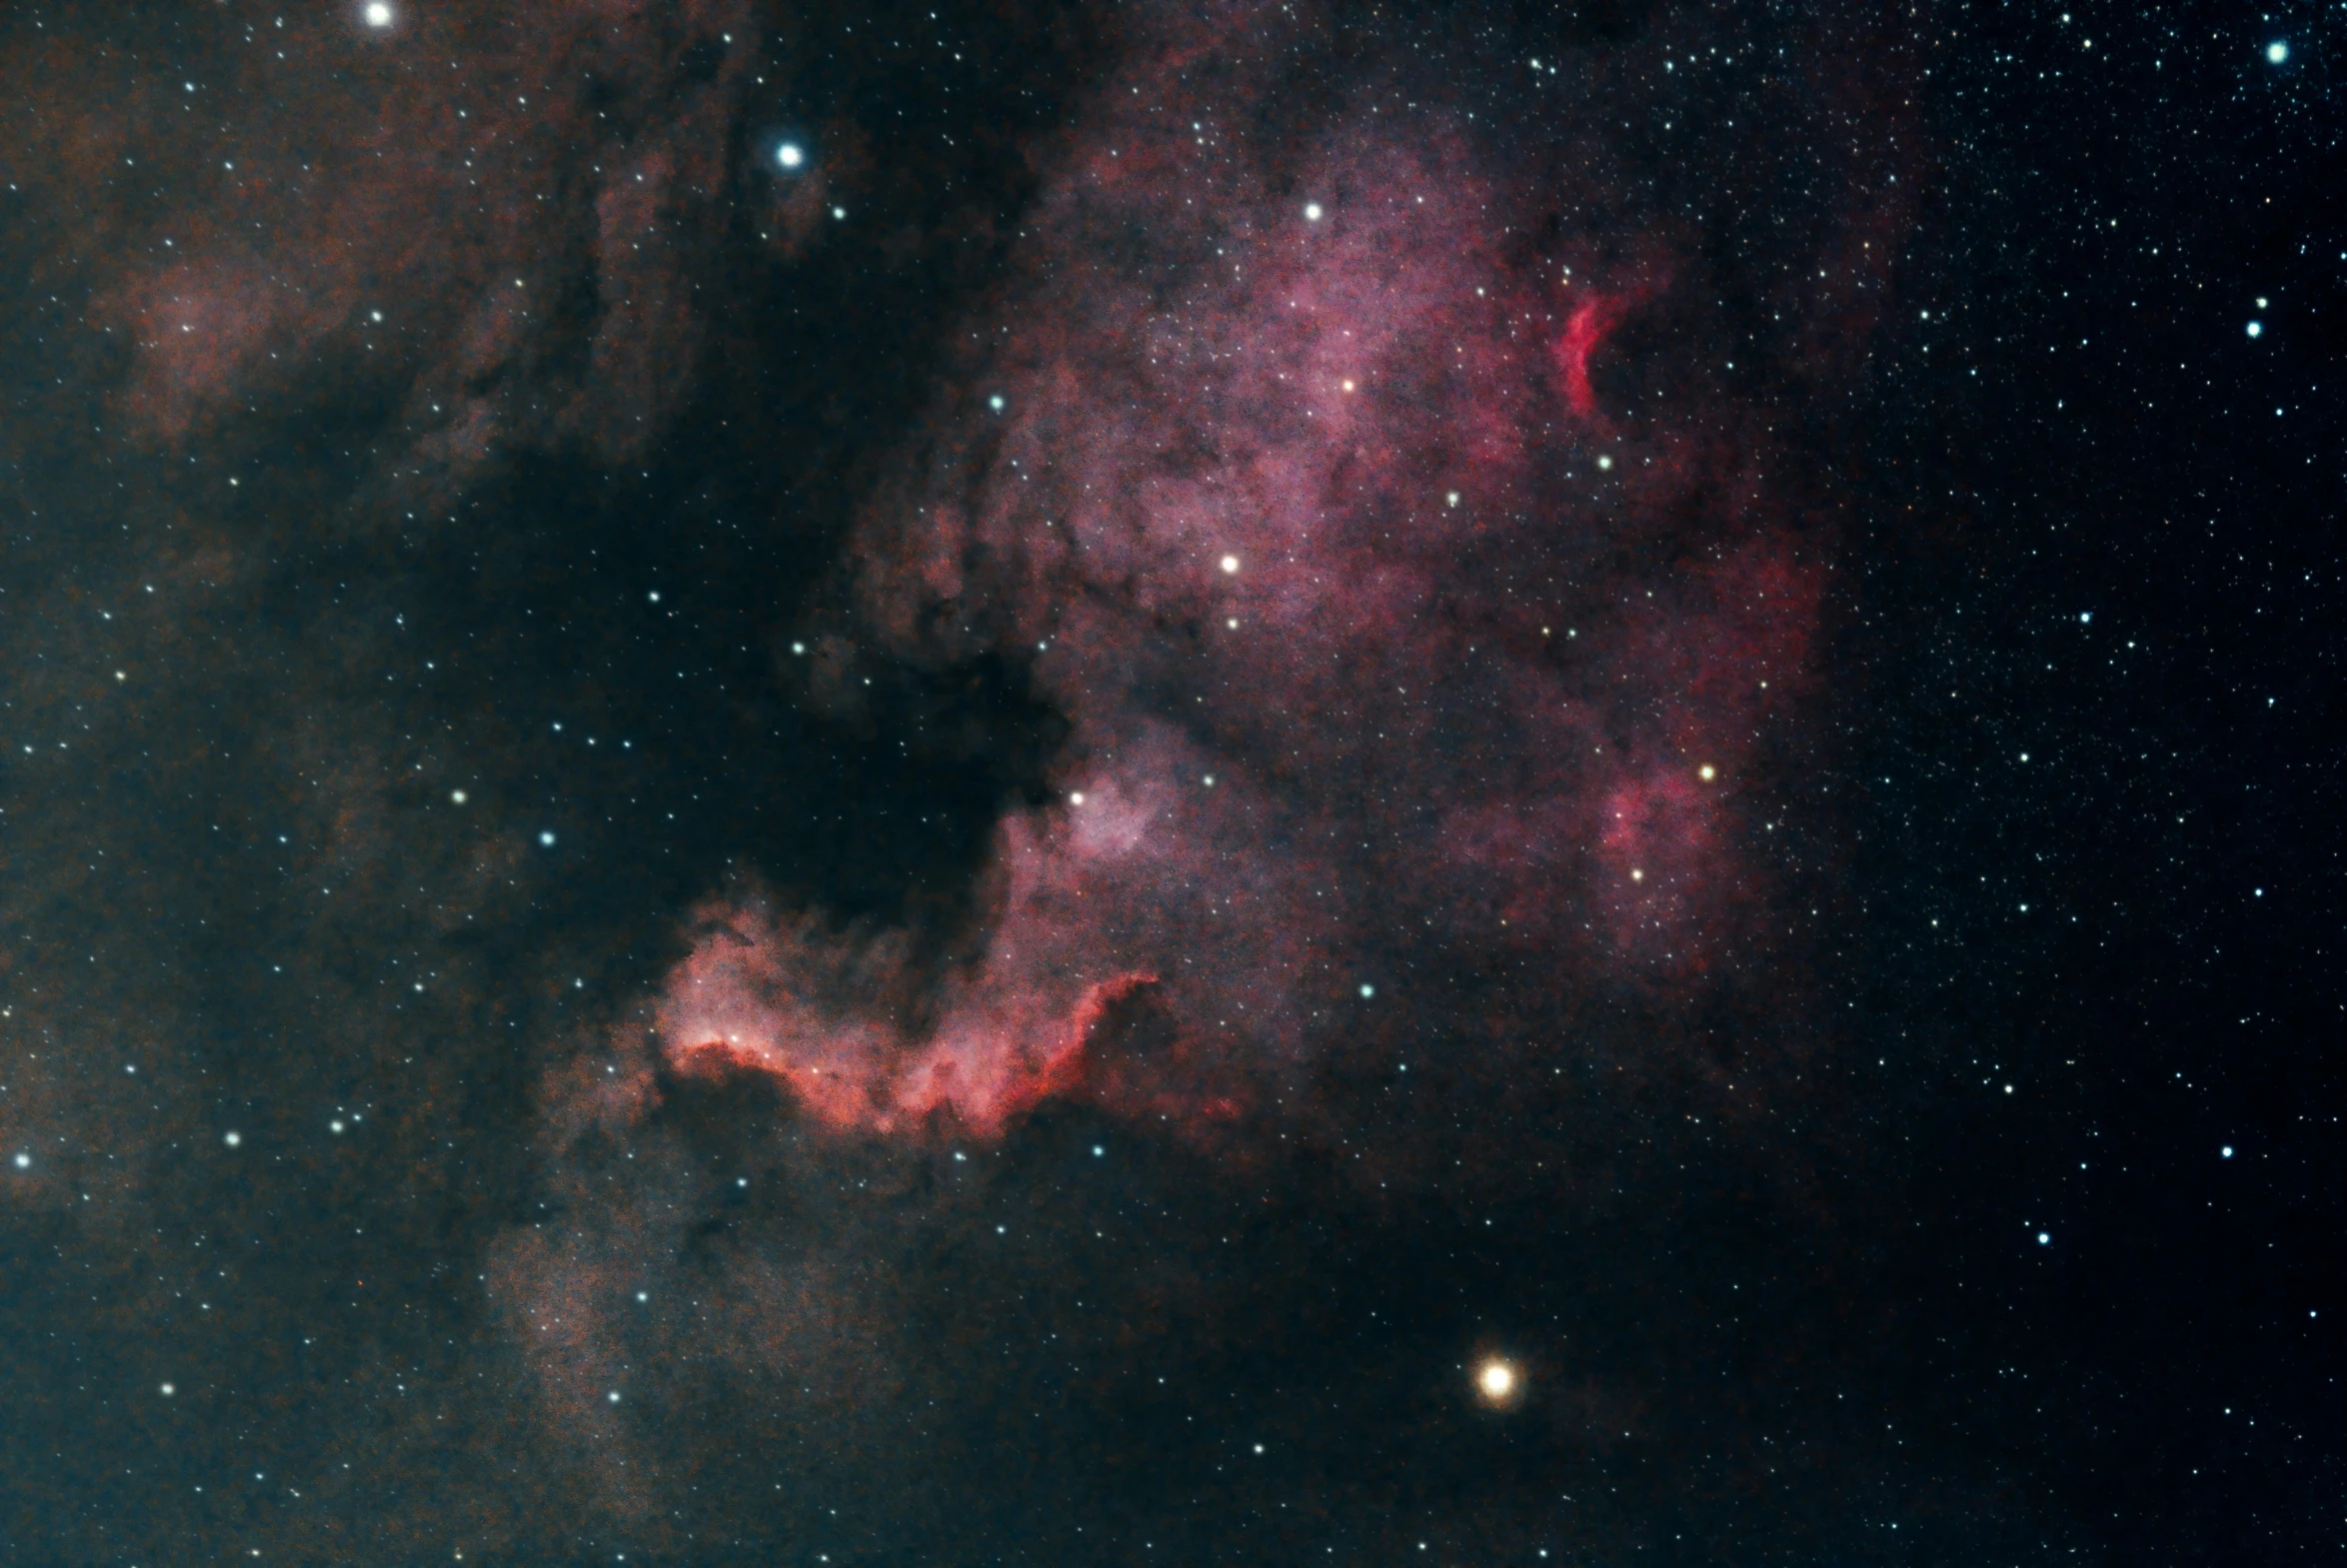 a star forming region is seen in this image